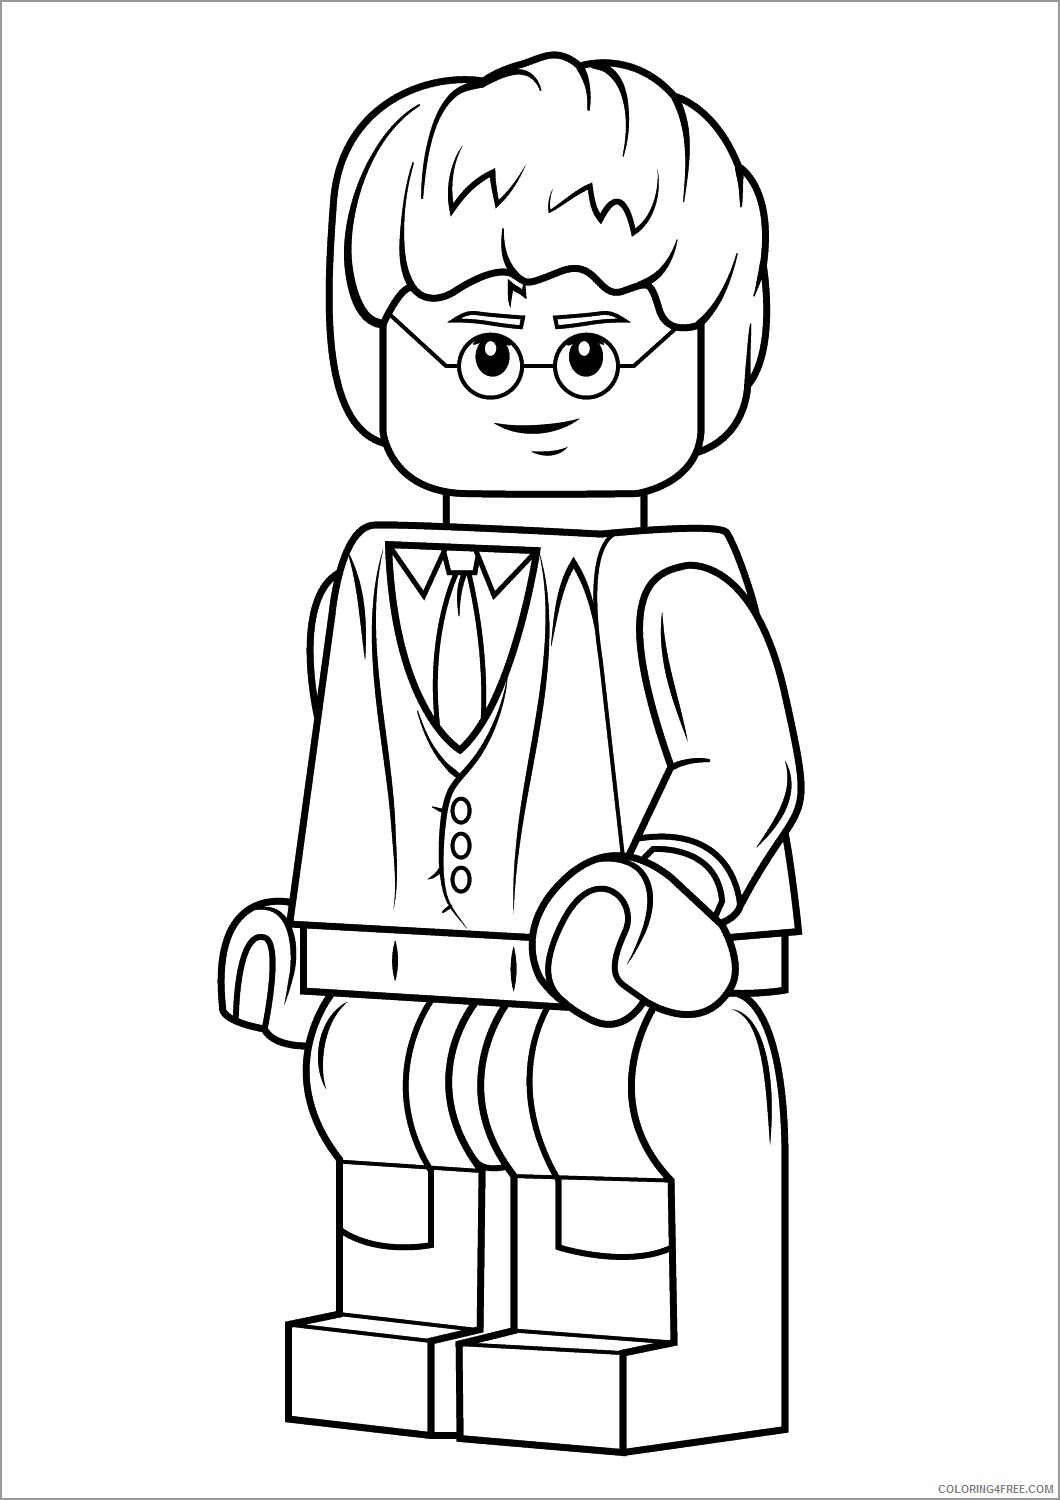 Harry Potter Coloring Pages TV Film lego harry potter Printable 2020 03551 Coloring4free